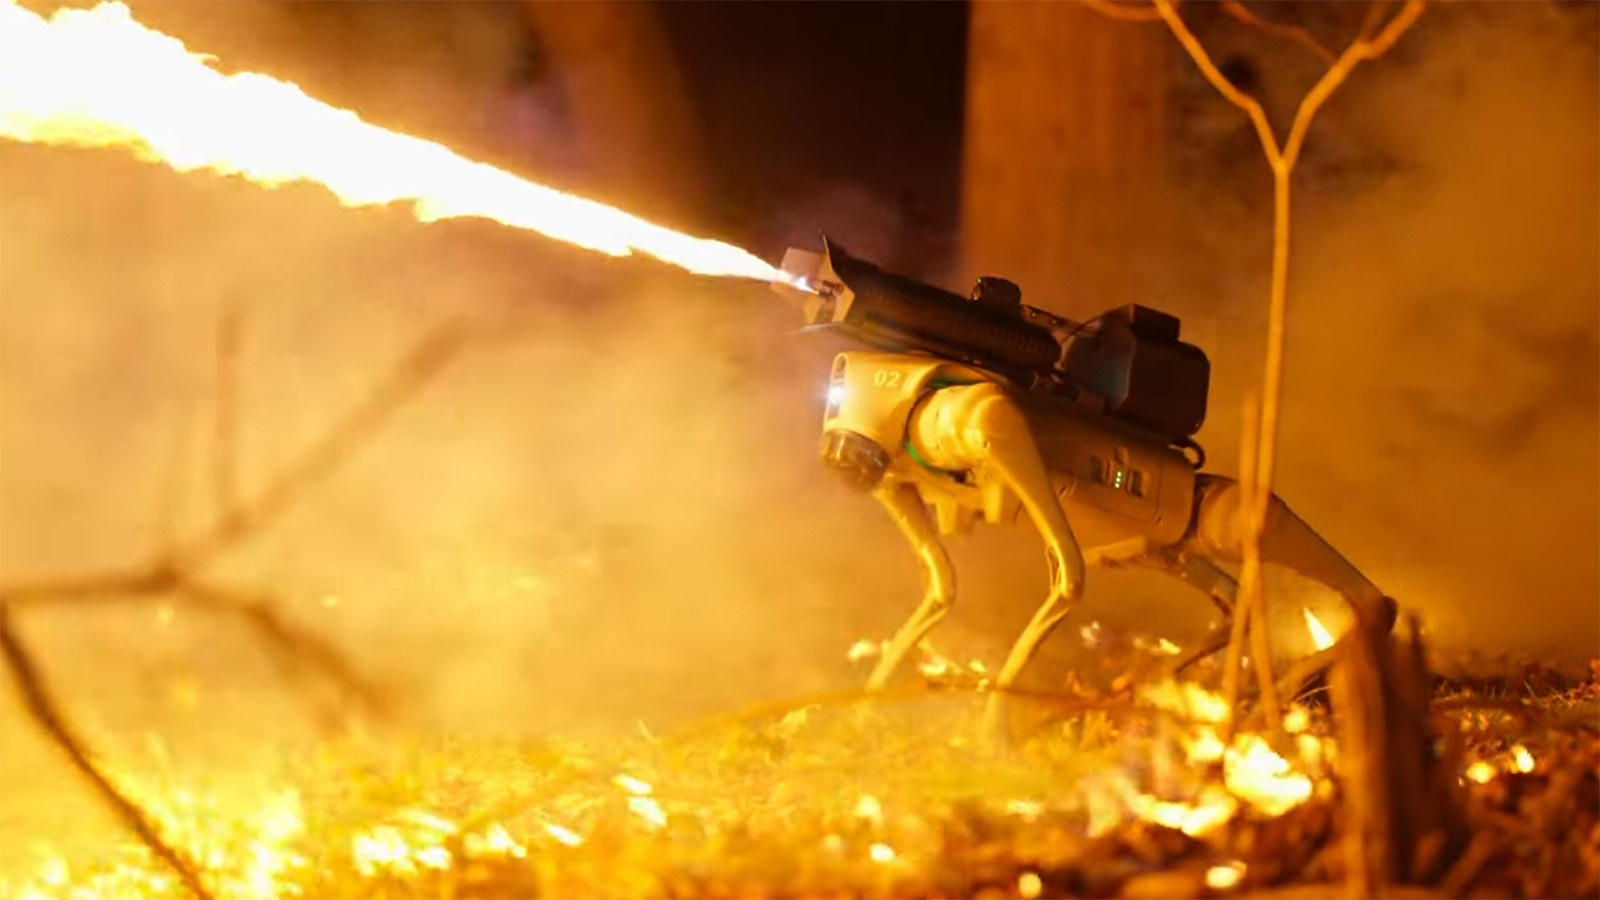 The newest creation of Throwflame is a robot dog with a laser-guided flamethrower mounted to it.